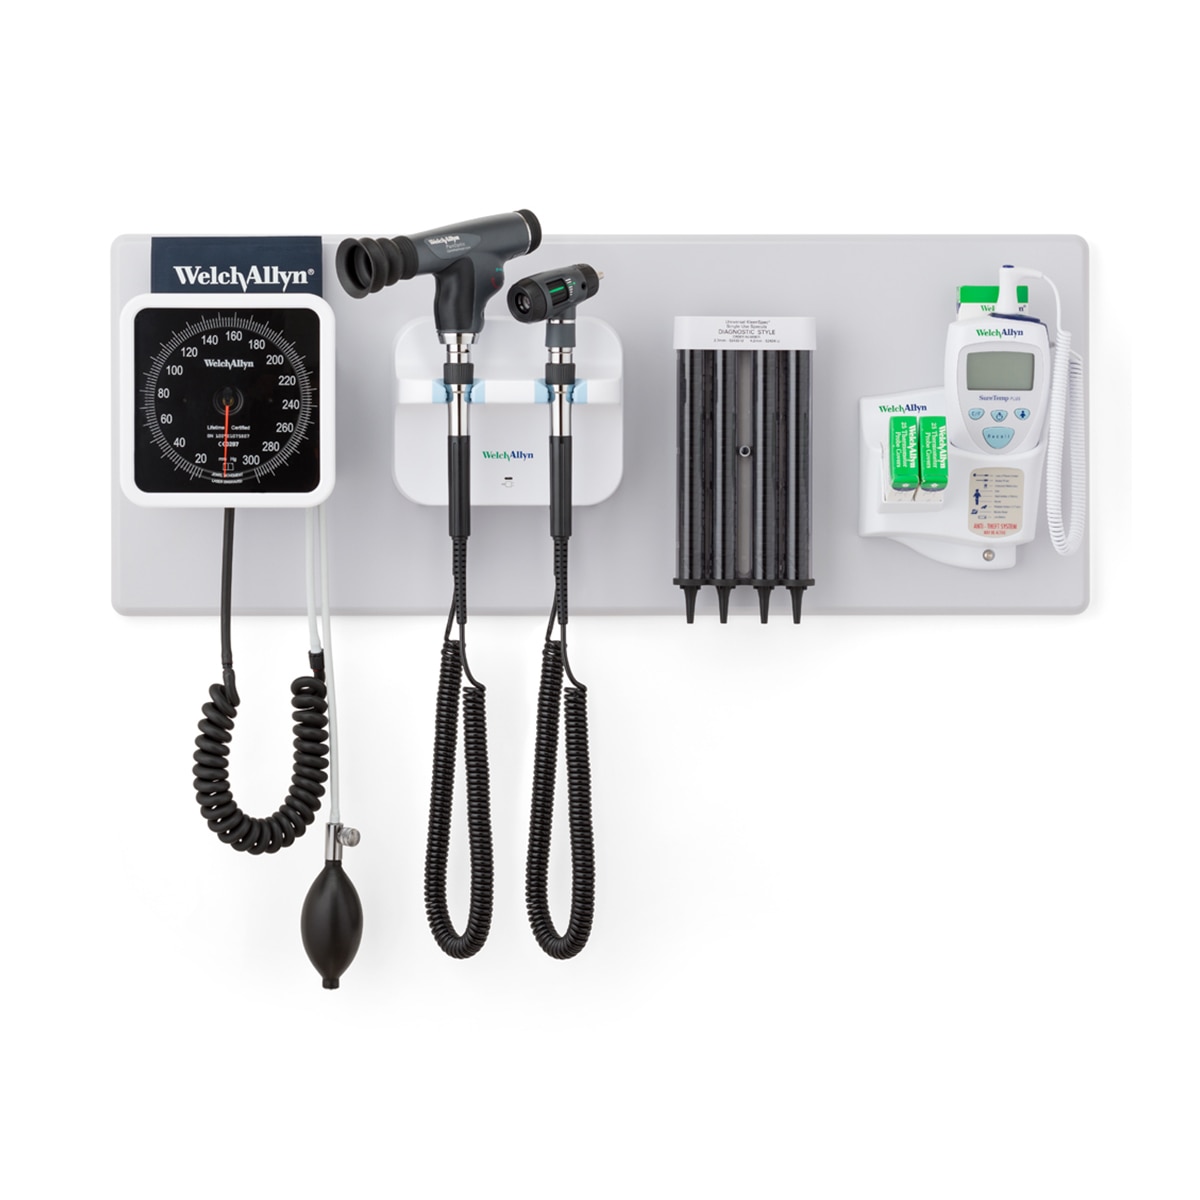 777 Integrated Wall System with BP gauge, otoscope, PanOptic ophthalmoscope, probe covers and SureTemp thermometer